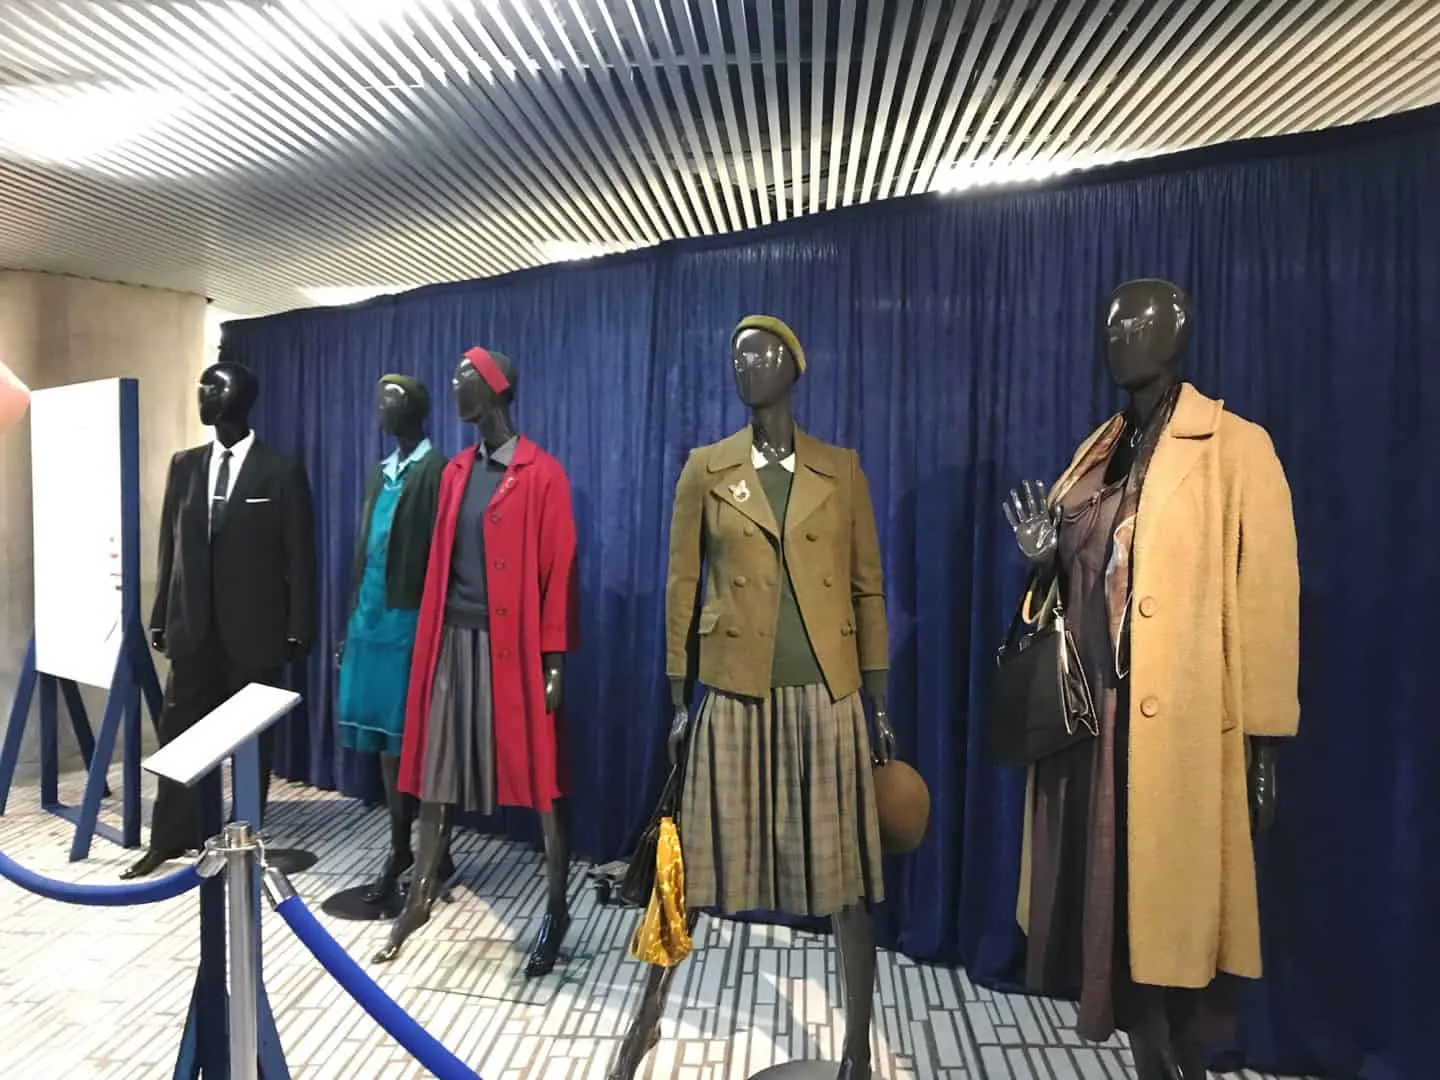 Costumes from The Shape of Water movie on display in Toronto